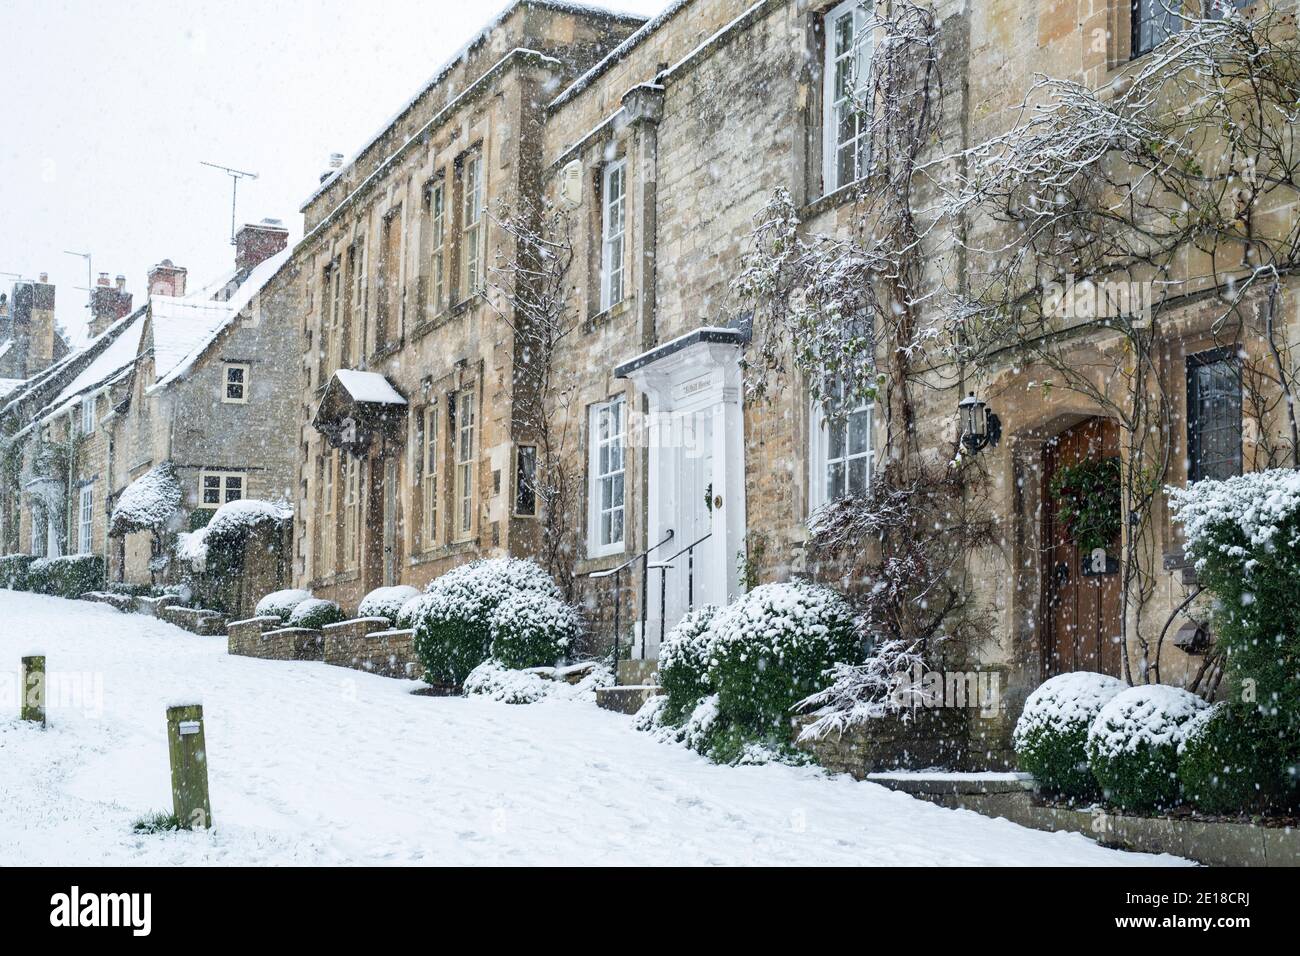 Town houses on Burford Hill in the December Snow. Burford, Cotswolds, Oxfordshire, England Stock Photo